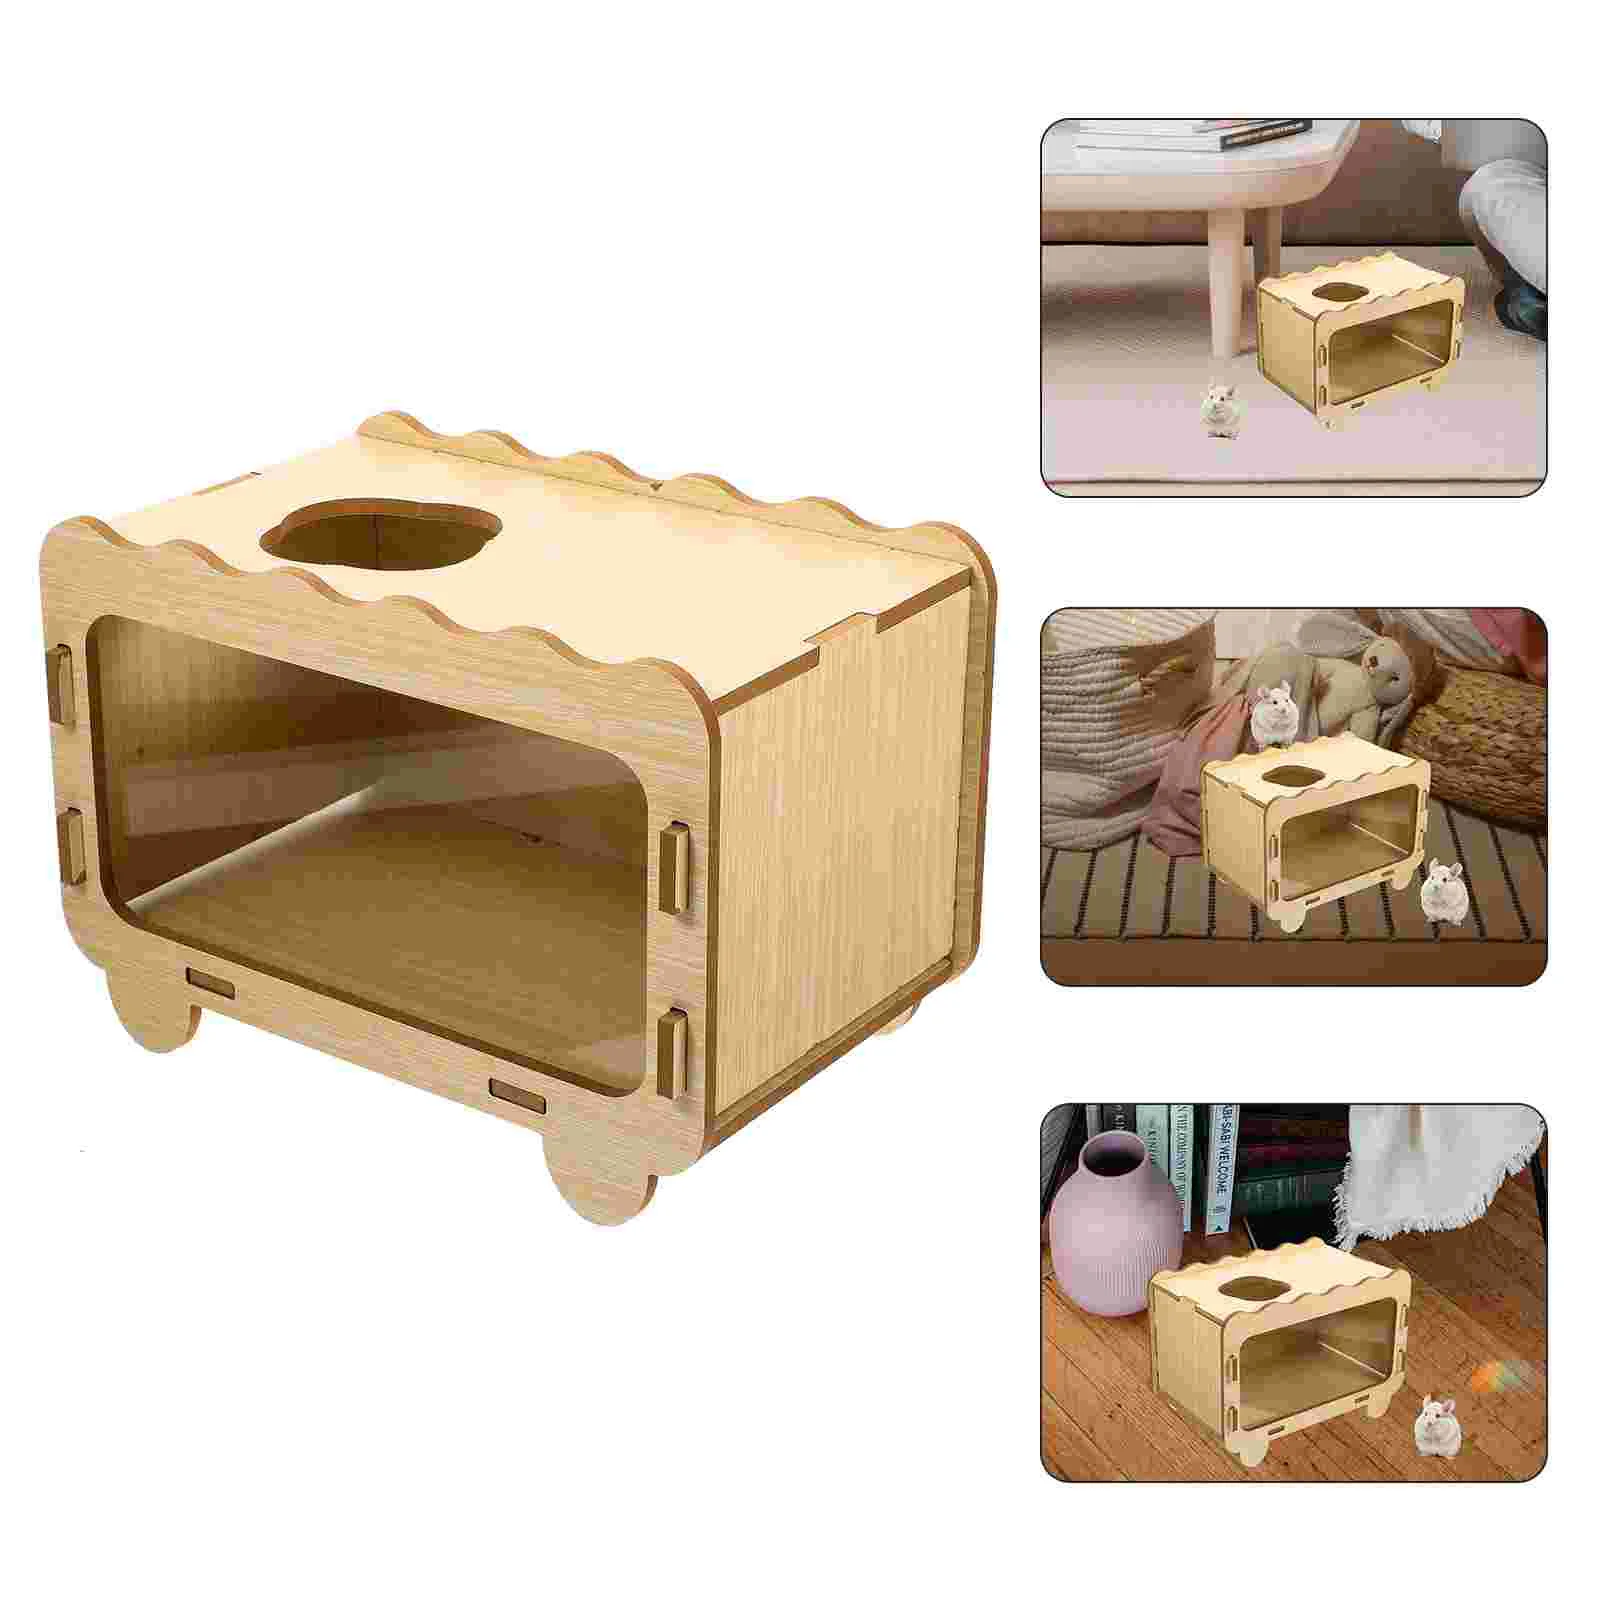 

Bunny Bunny Toys Hideout House Pets Sleeping Cage Dig Wooden Nest Supply Funny Digging Toy